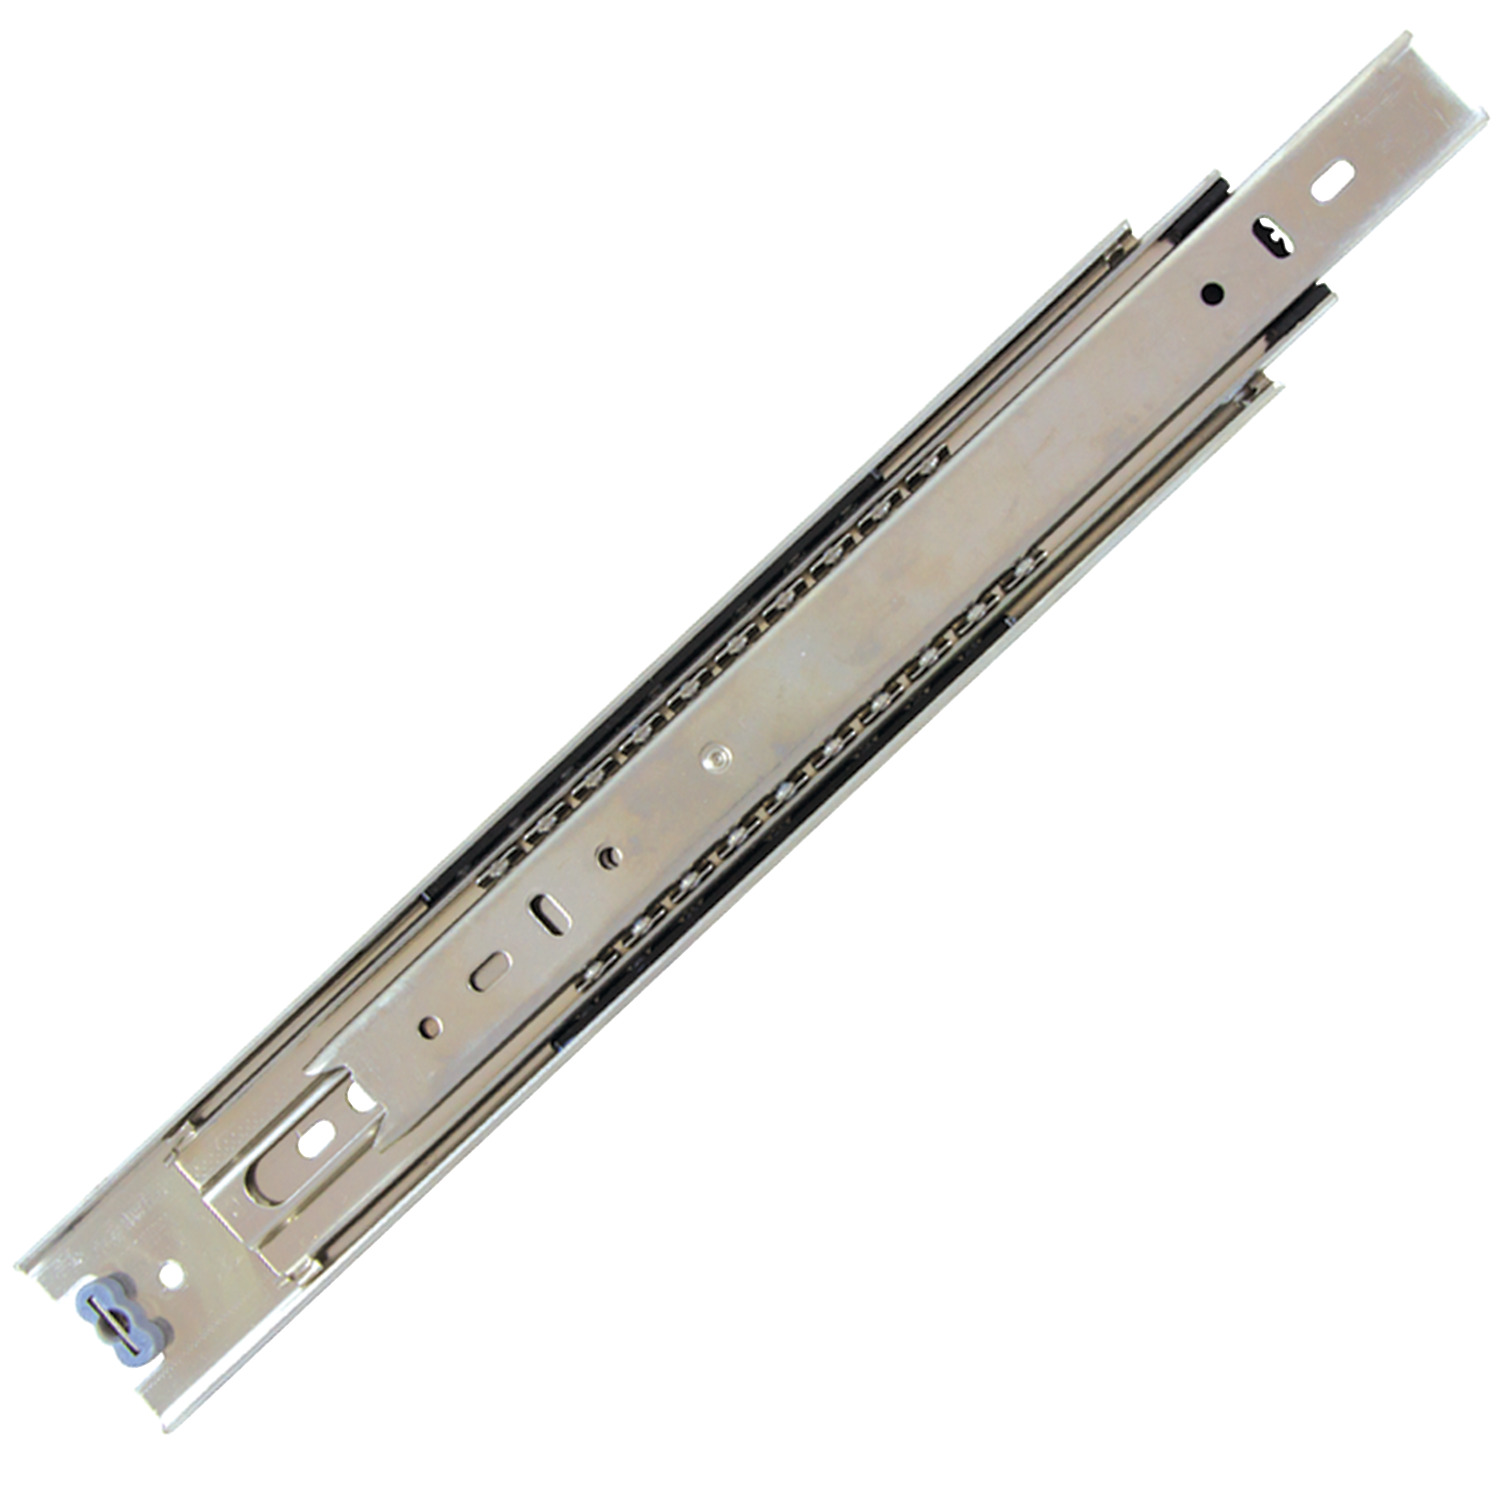 P7200.AC0300 Drawer Slide Full Extn Length 300; Load 45kg per pair. Sold Individually. Stainless